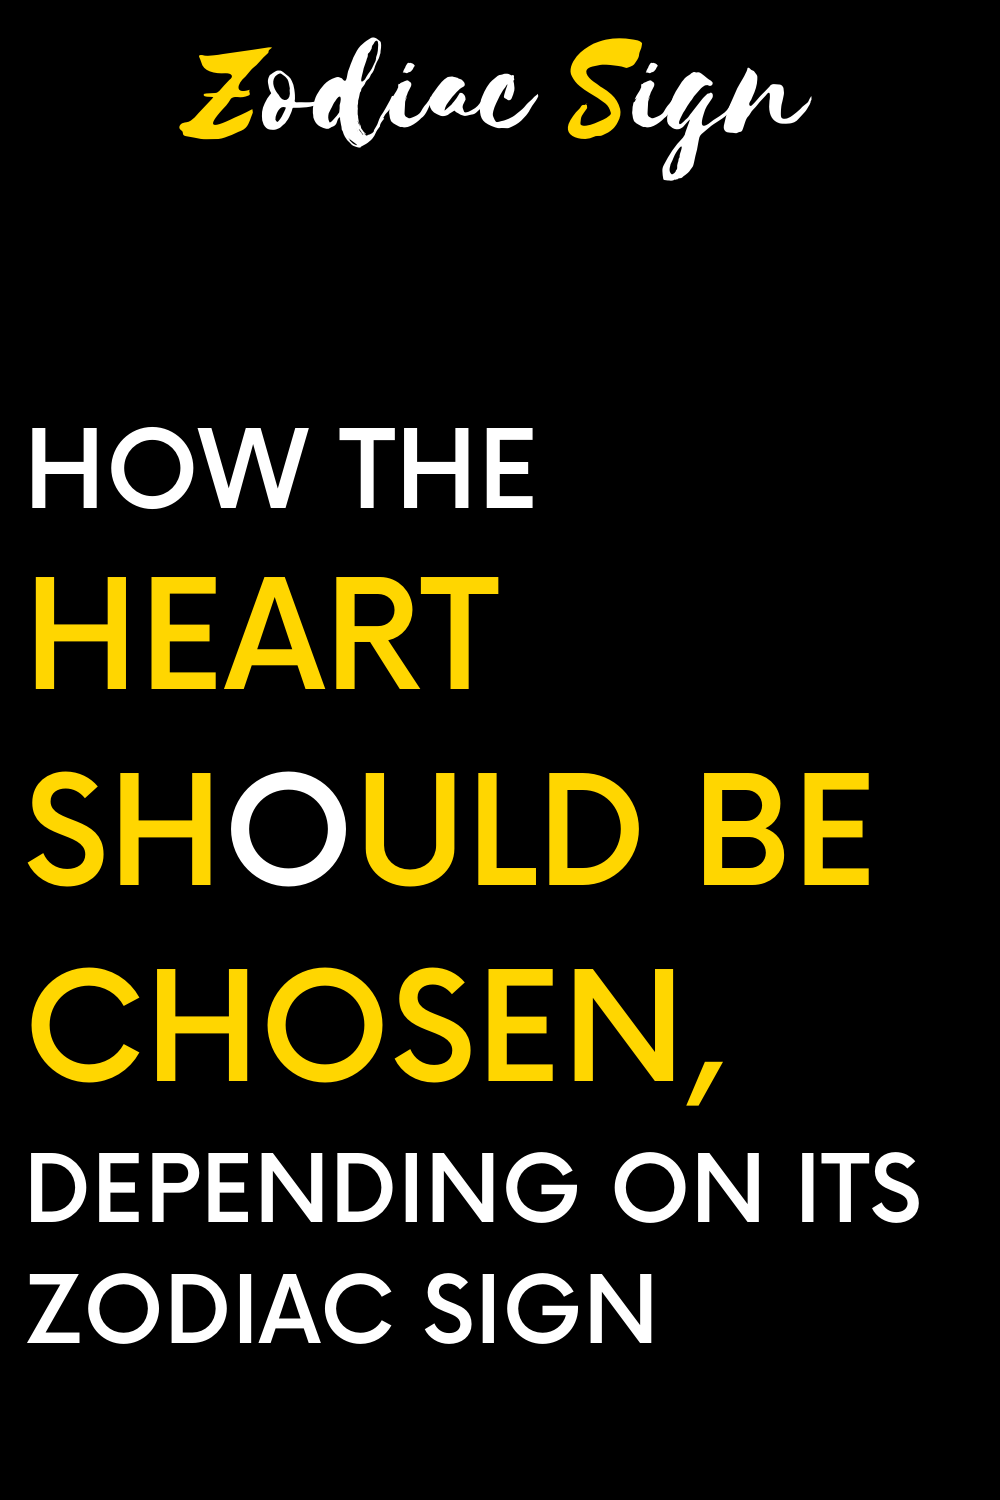 How the heart should be chosen, depending on its zodiac sign